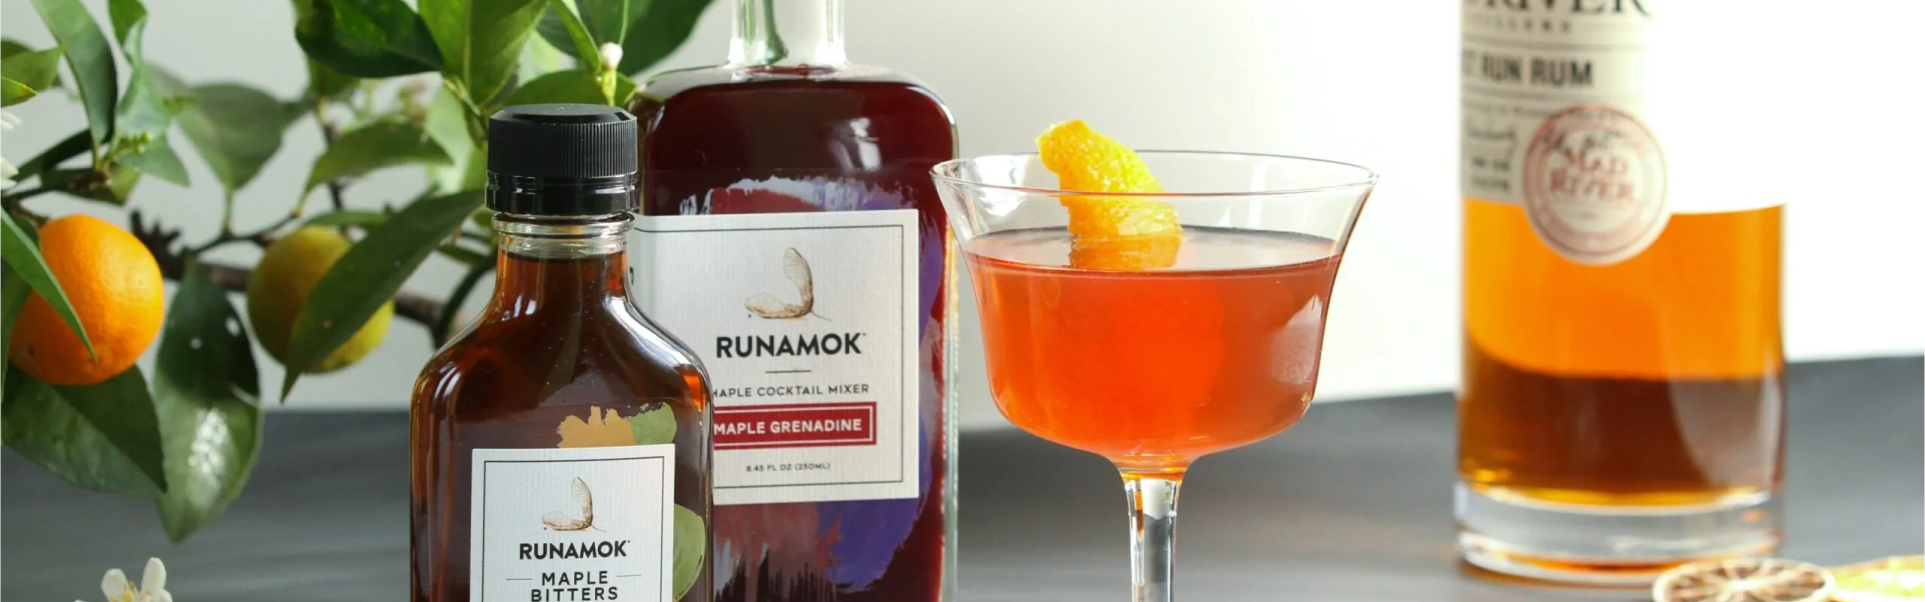 2 different bottles of Runamok products and a cocktail glass, lemons and a Rum bottle on the background